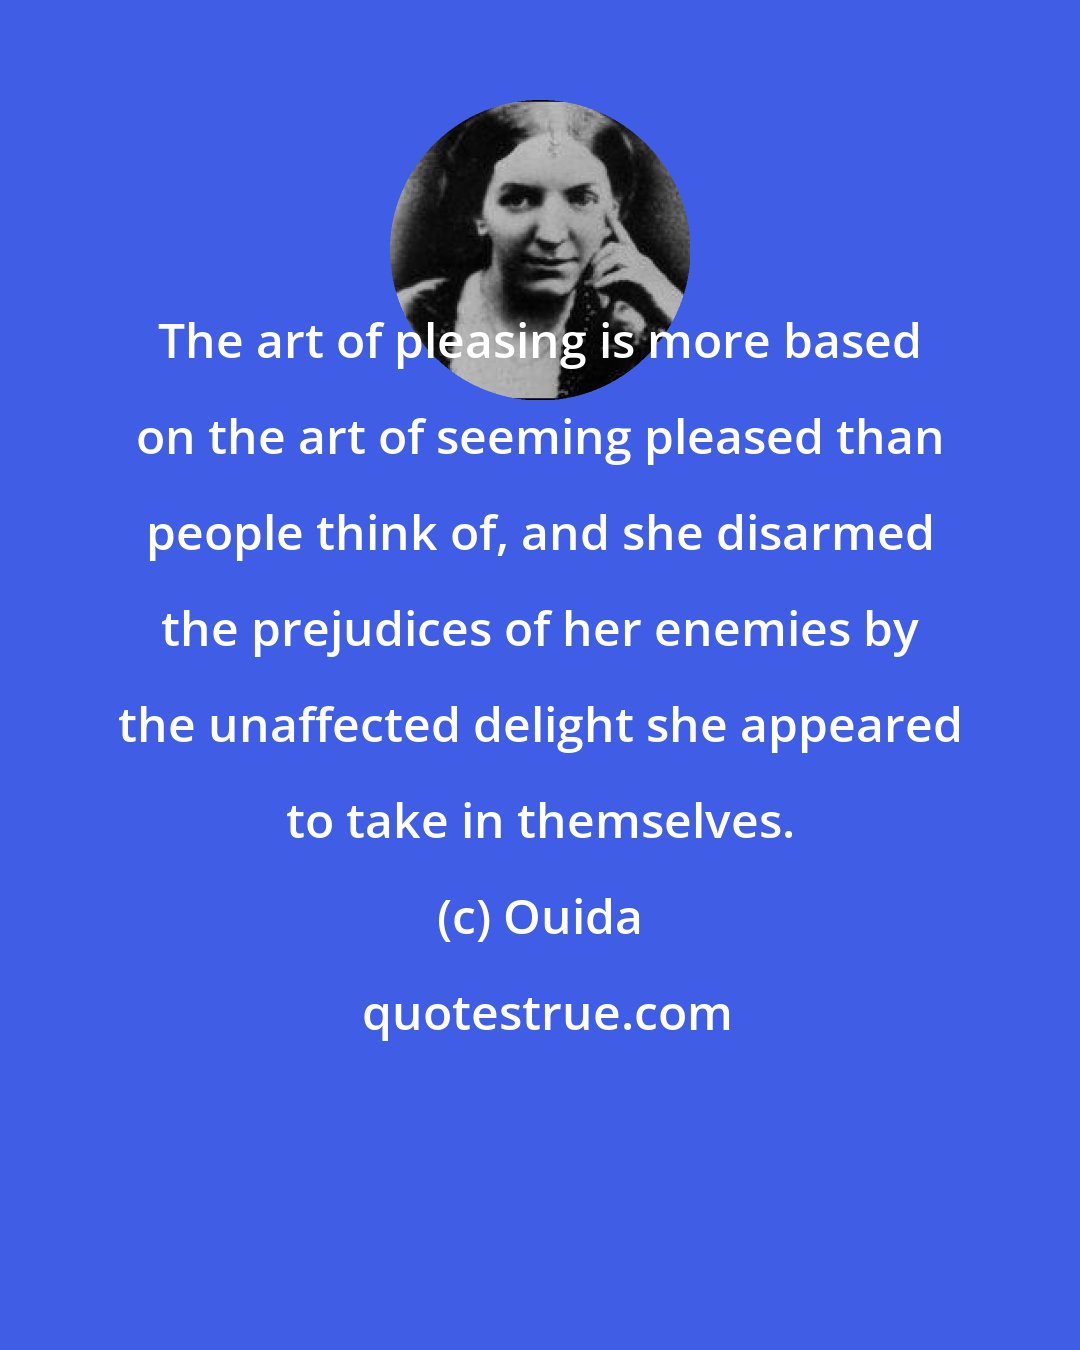 Ouida: The art of pleasing is more based on the art of seeming pleased than people think of, and she disarmed the prejudices of her enemies by the unaffected delight she appeared to take in themselves.